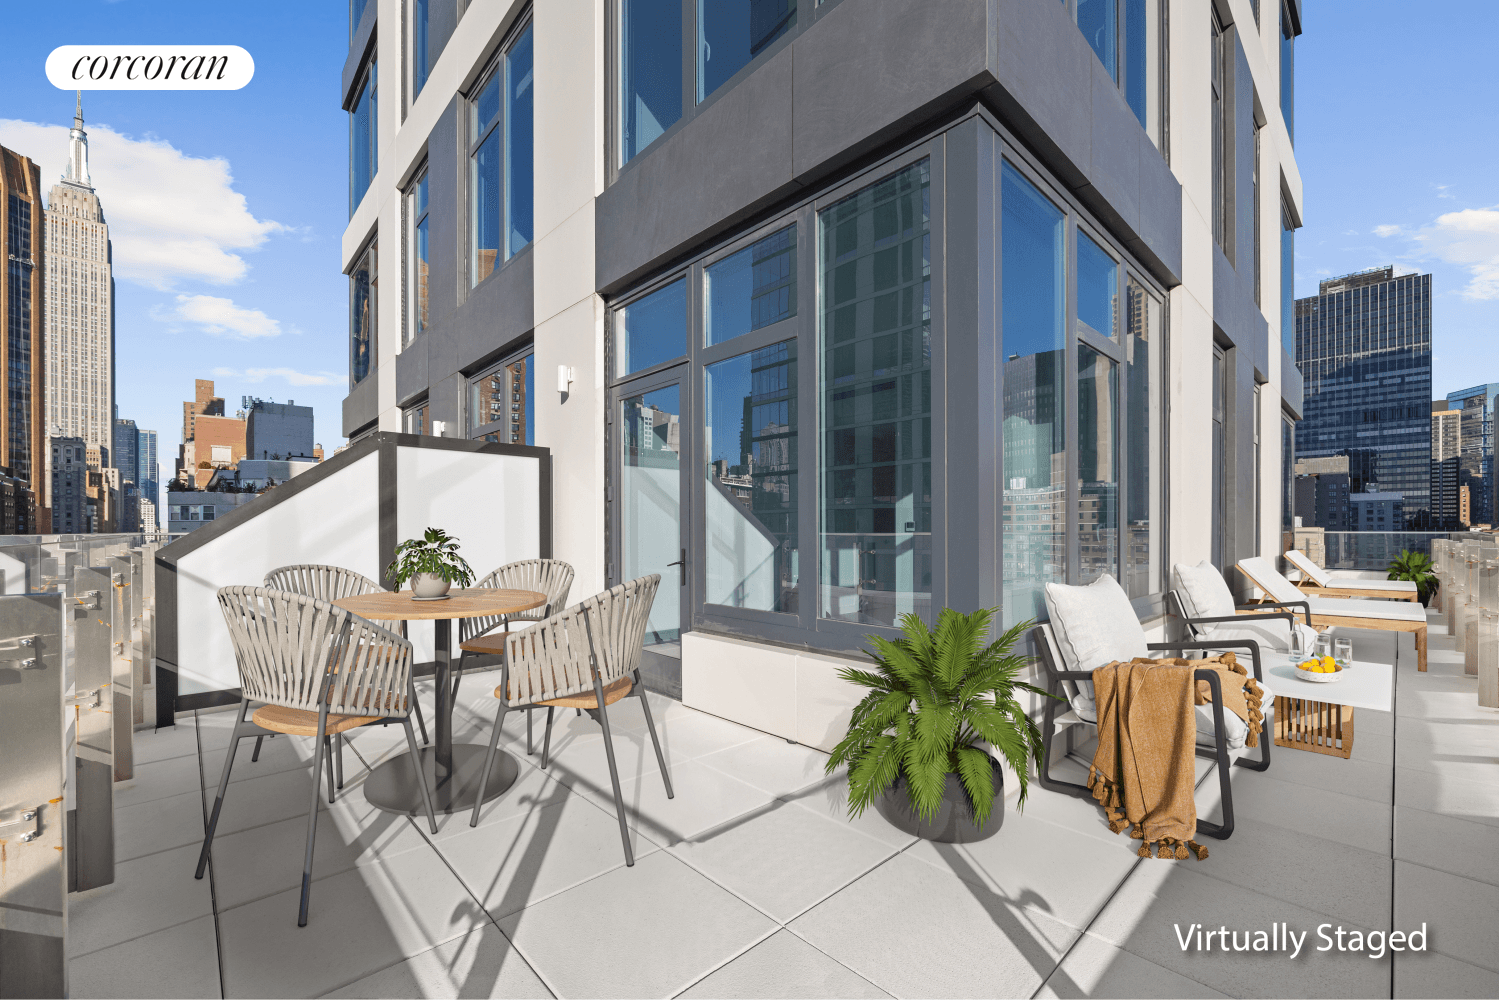 Welcome to Residence E, a corner unit two bedroom two bathroom with an expansive private wrap around terrace facing south, east and north featuring remarkable city and Empire State views.